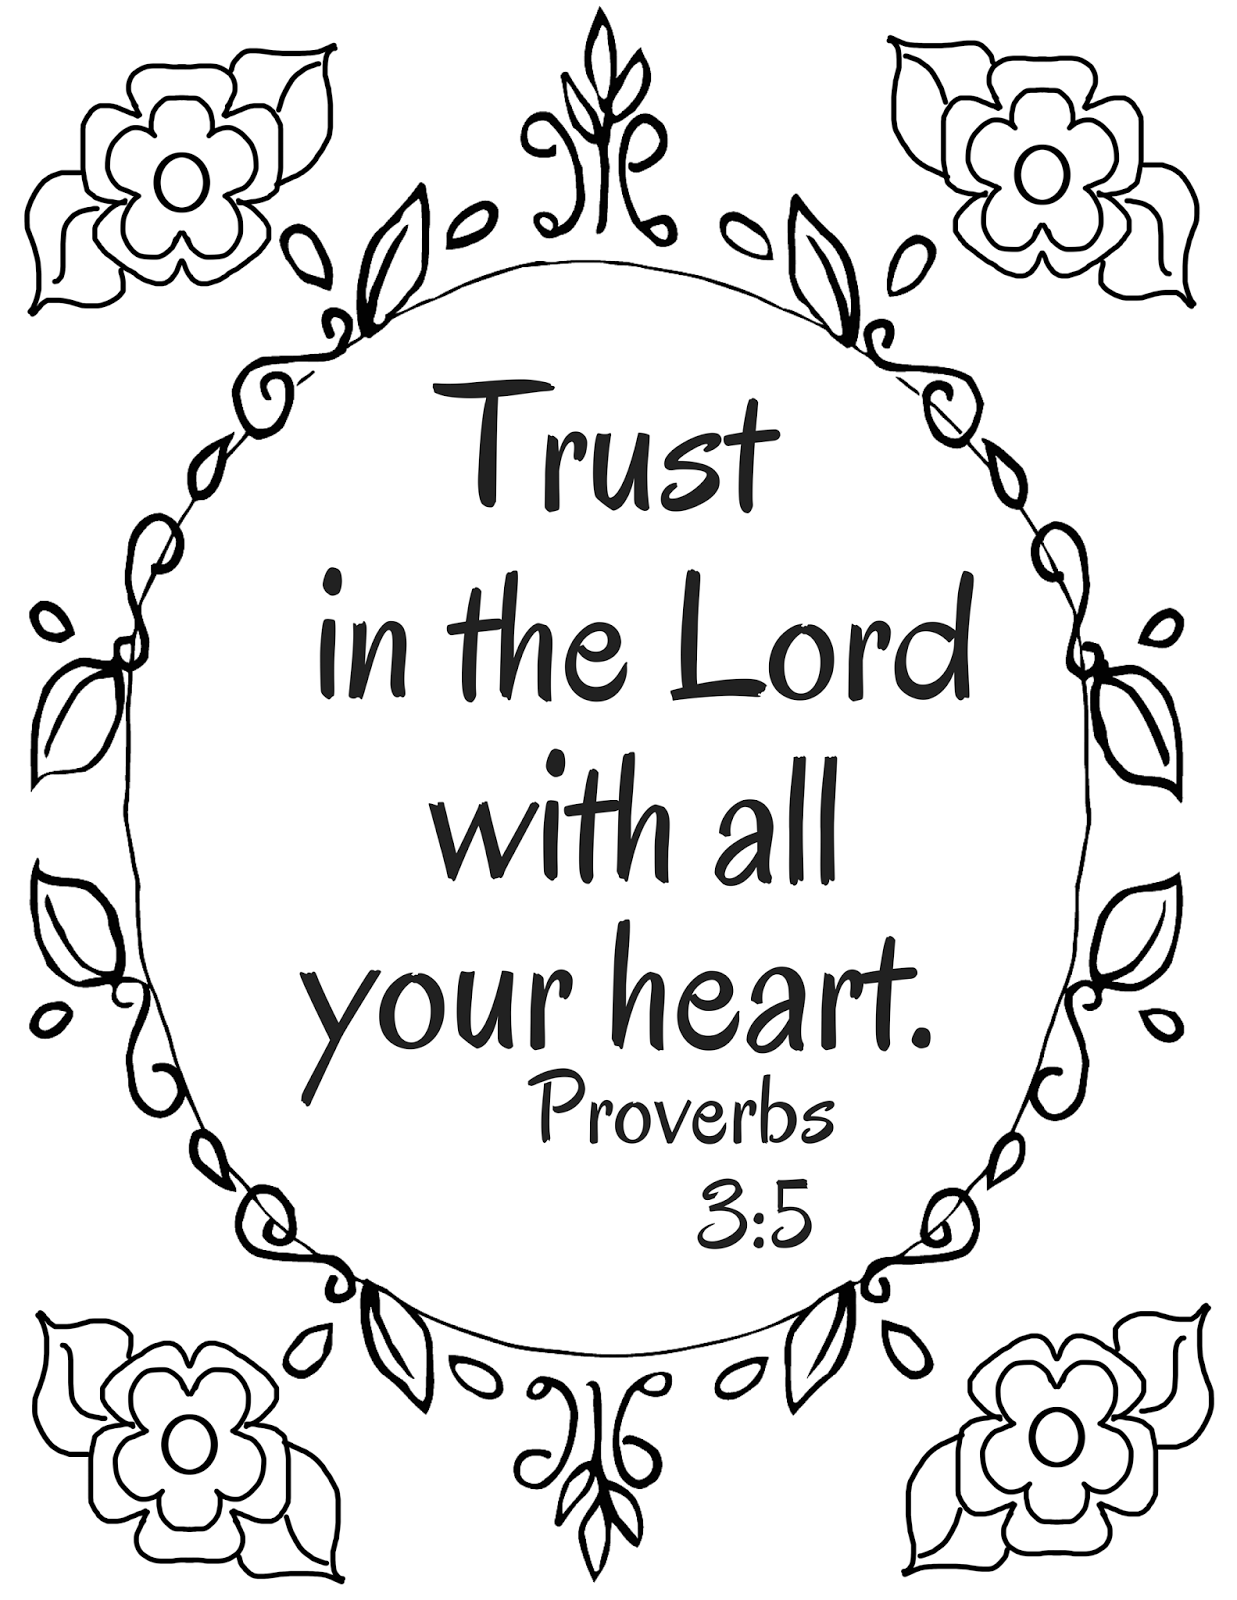 The Prudent Pantry: Trust in the Lord with all your heart (a coloring page)